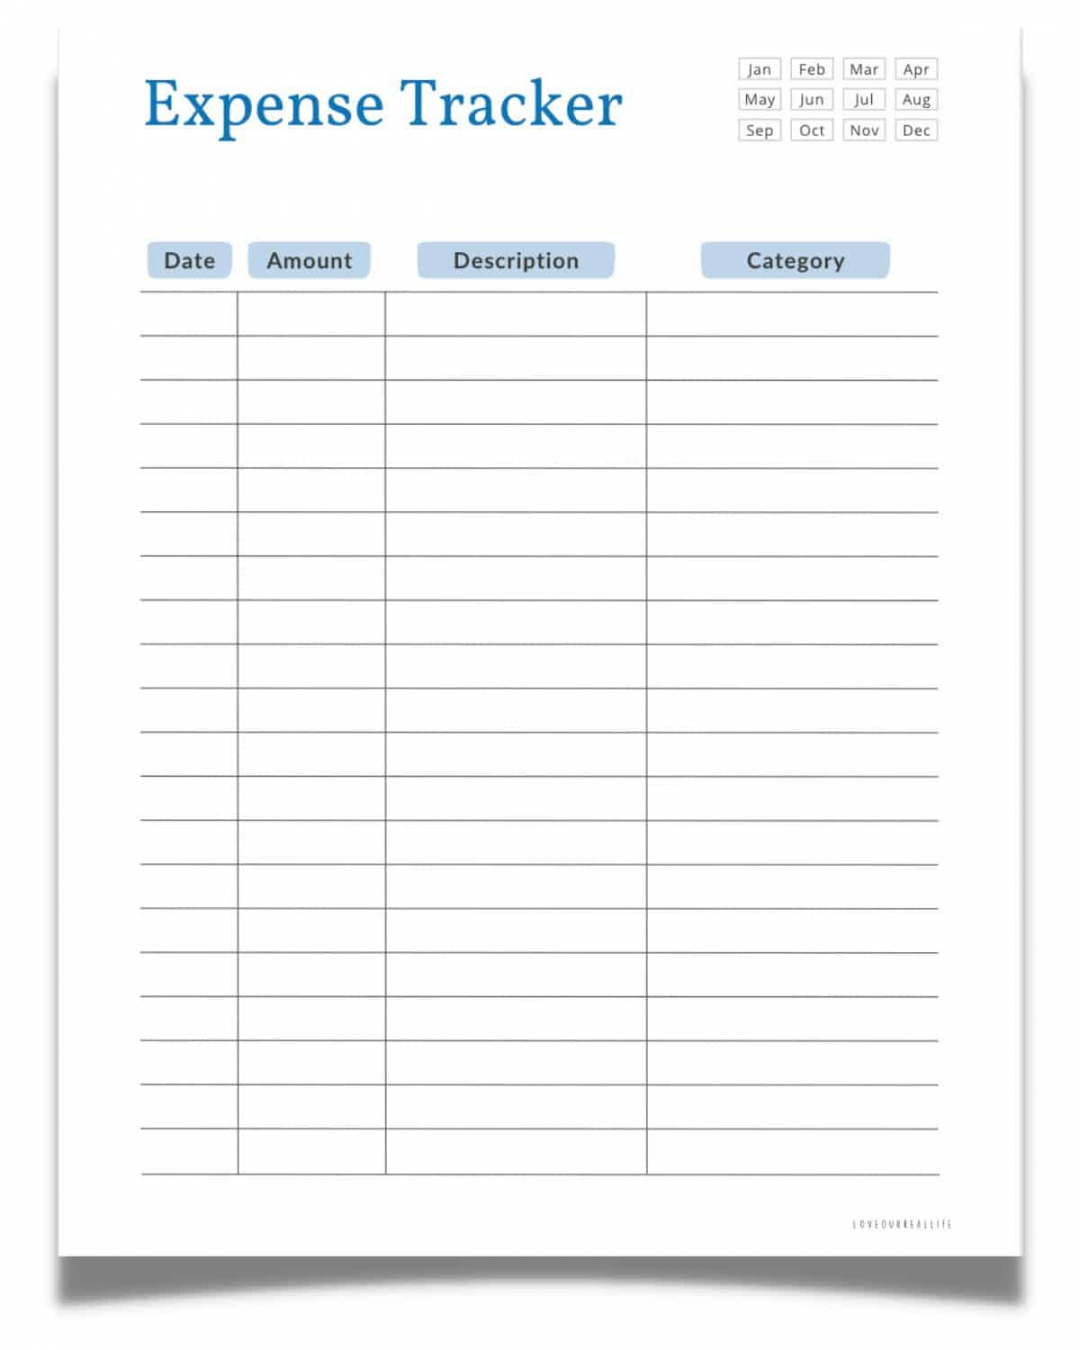 FREE Printable Expense Tracker - Monthly Budget Trackers ⋆ Love  - FREE Printables - Free Expense Tracker Printable